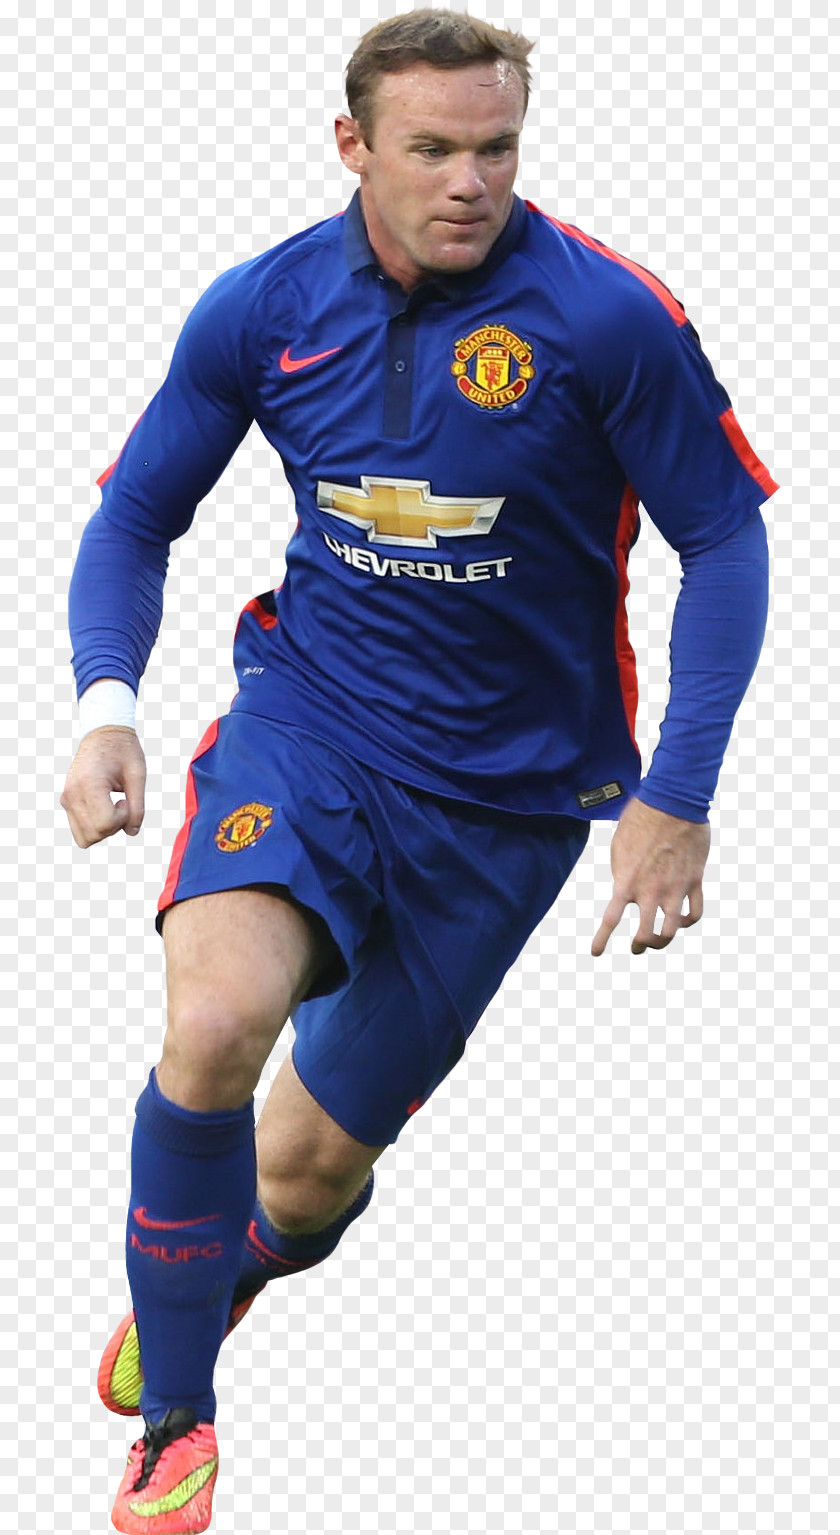 Ball Manchester United F.C. Team Sport Football Player Outerwear PNG